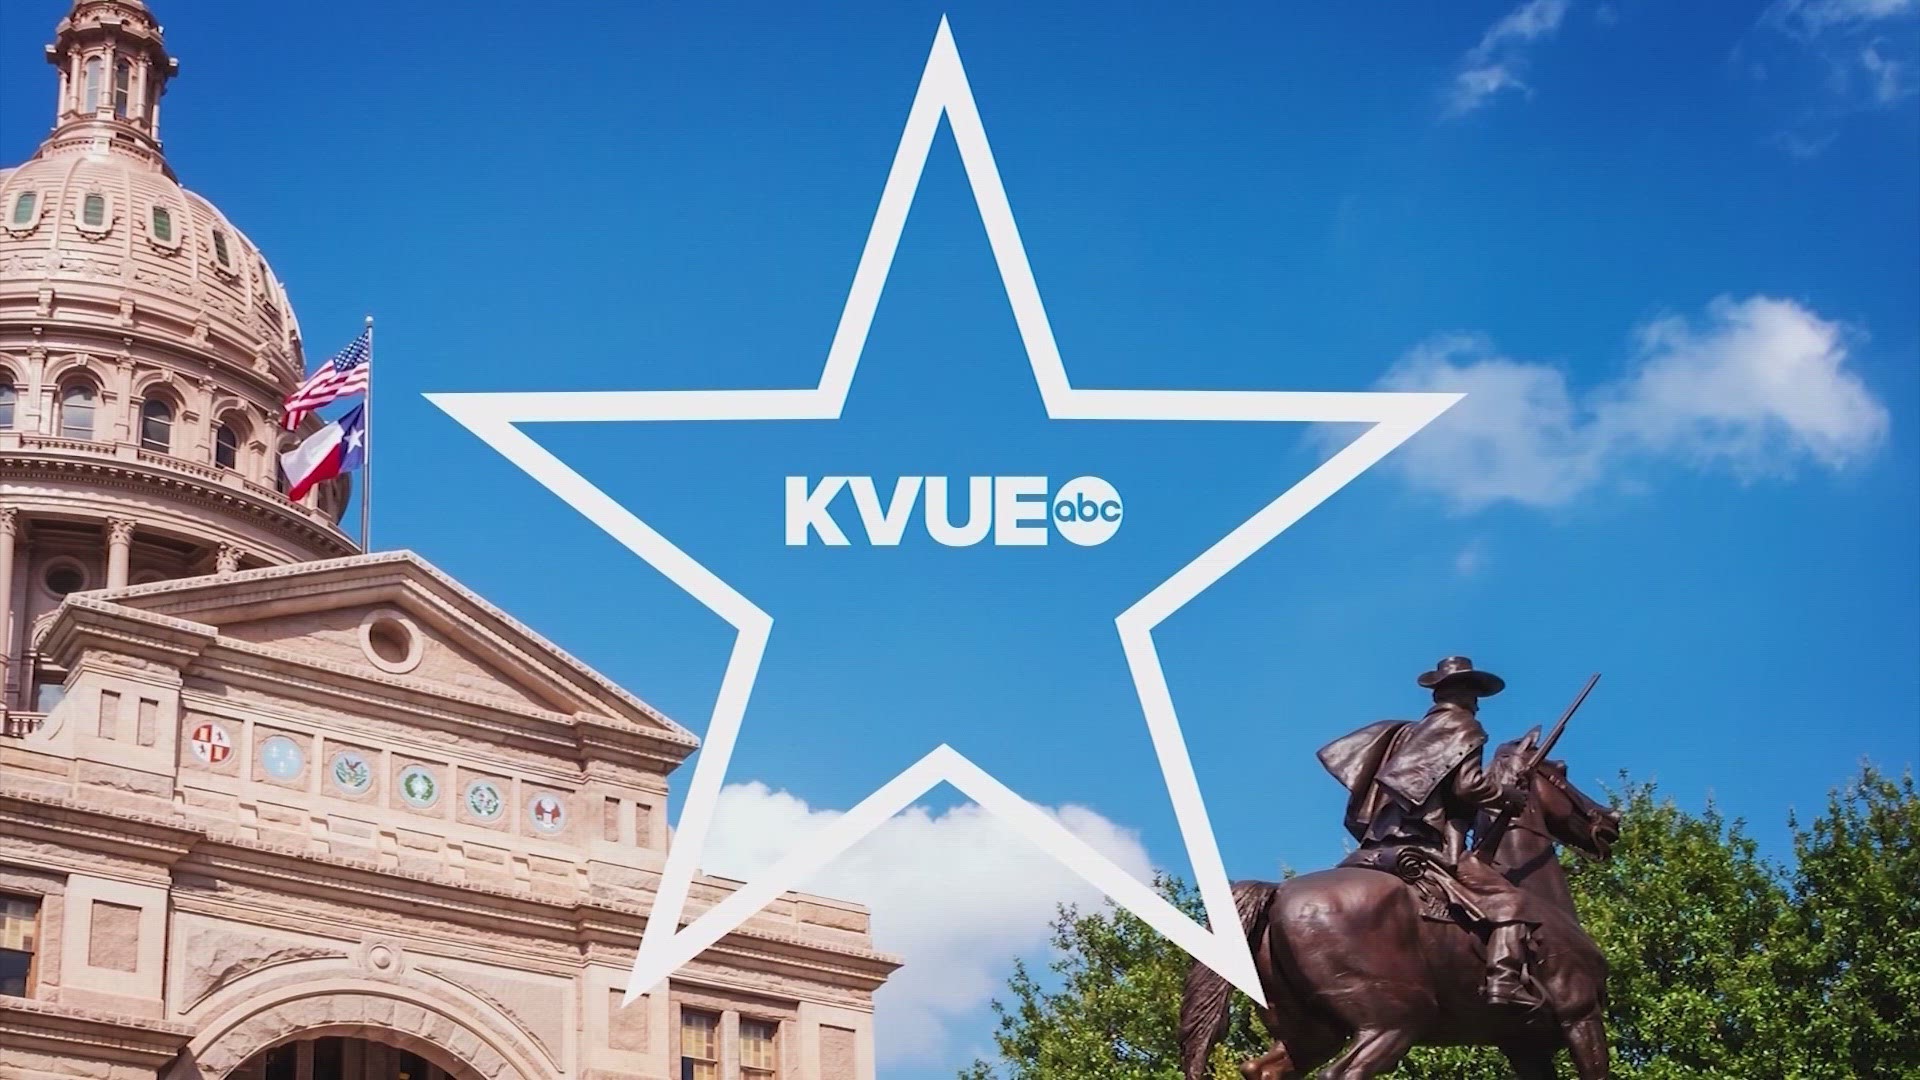 Russell Gold, senior editor at Texas Monthly, joined KVUE to talk about what he found.